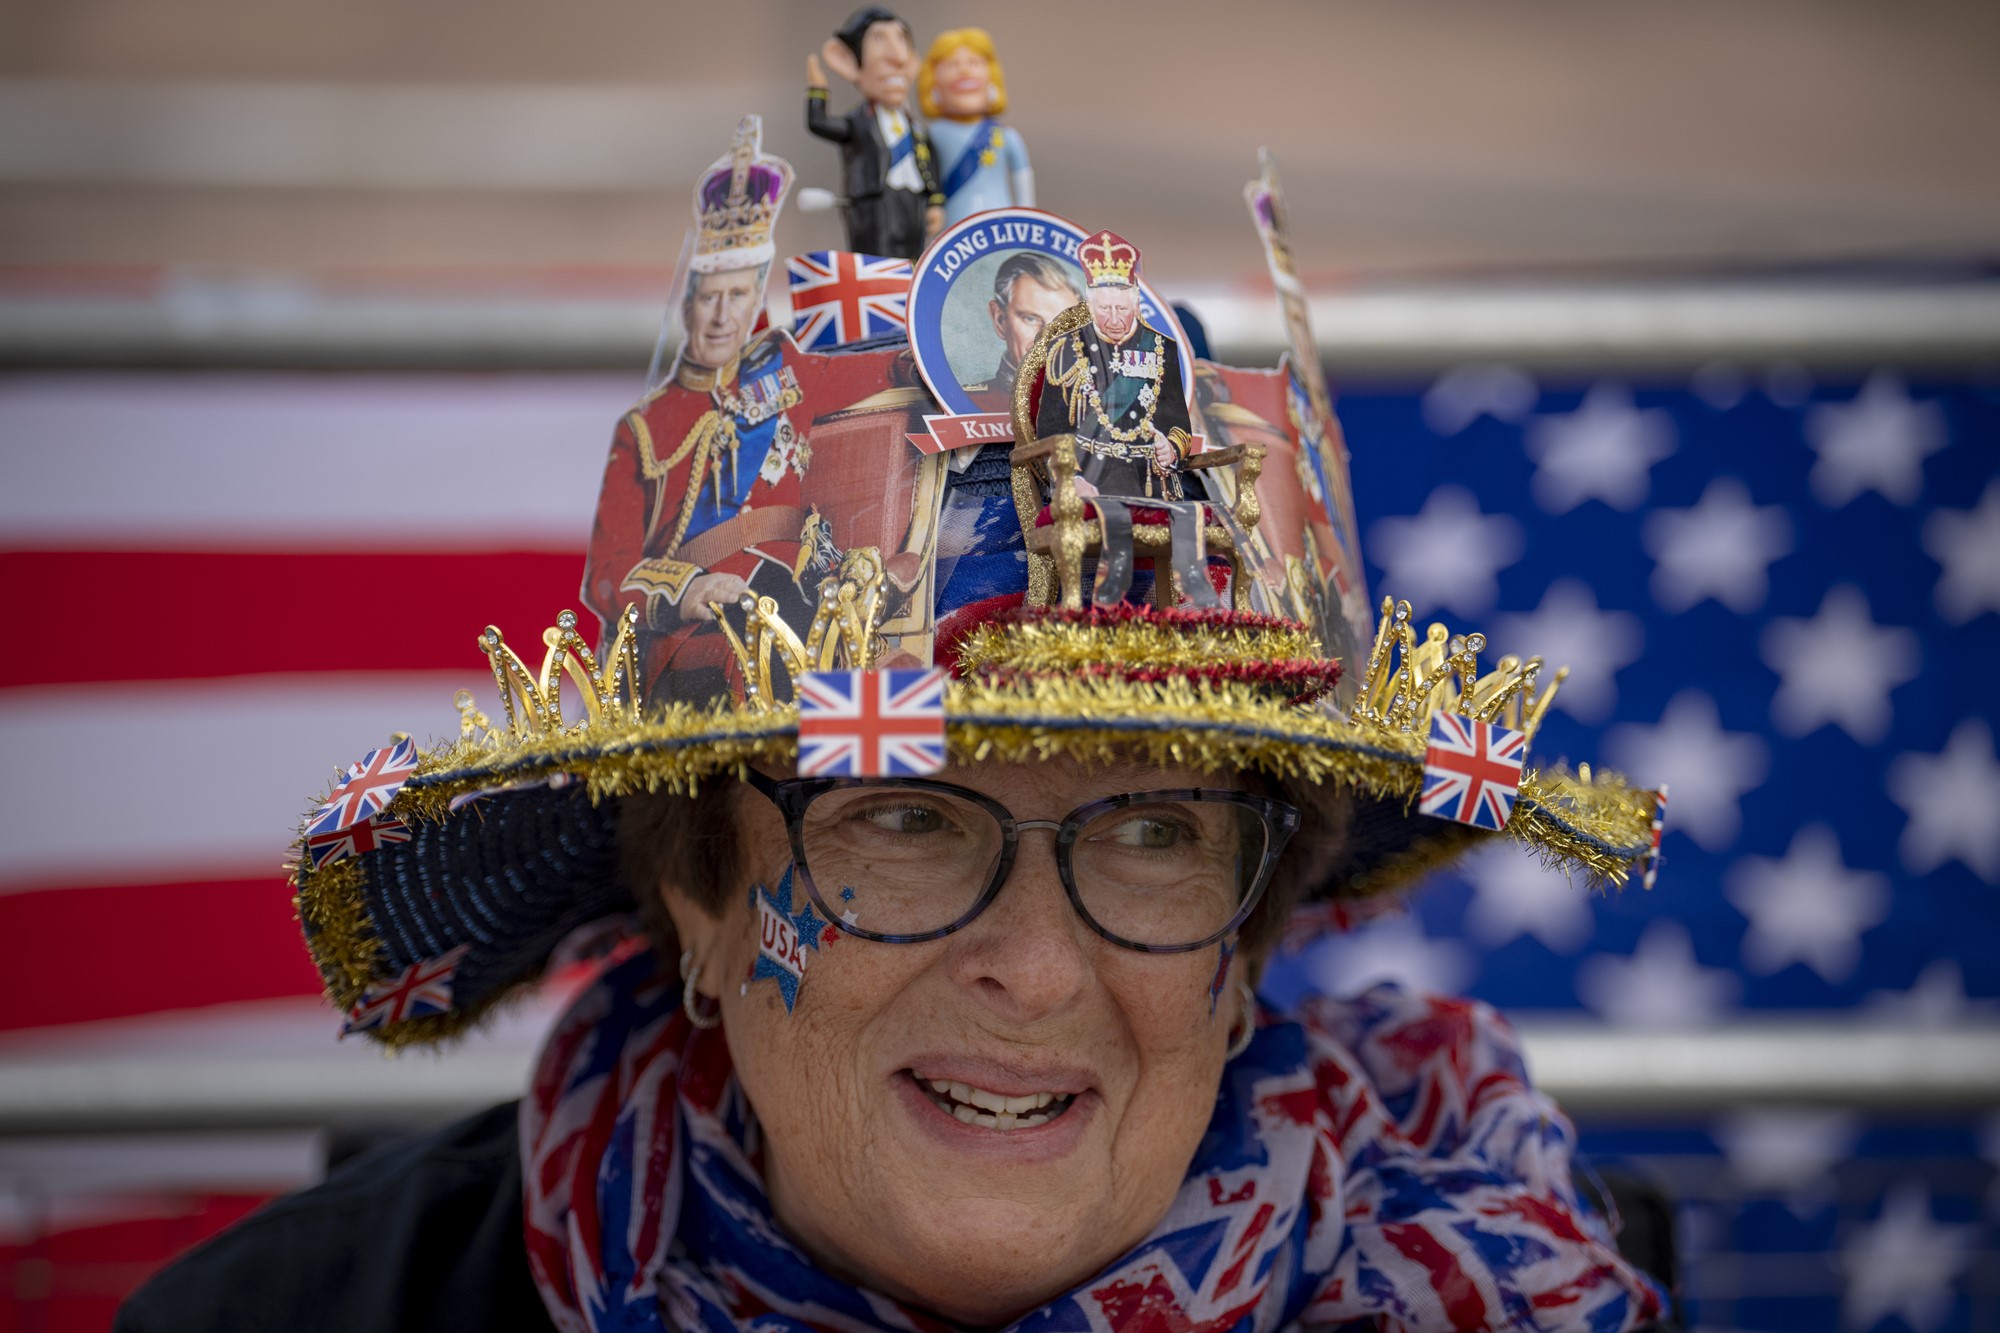 A woman wearing a hat decorated with royal imagery and images of King Charles III